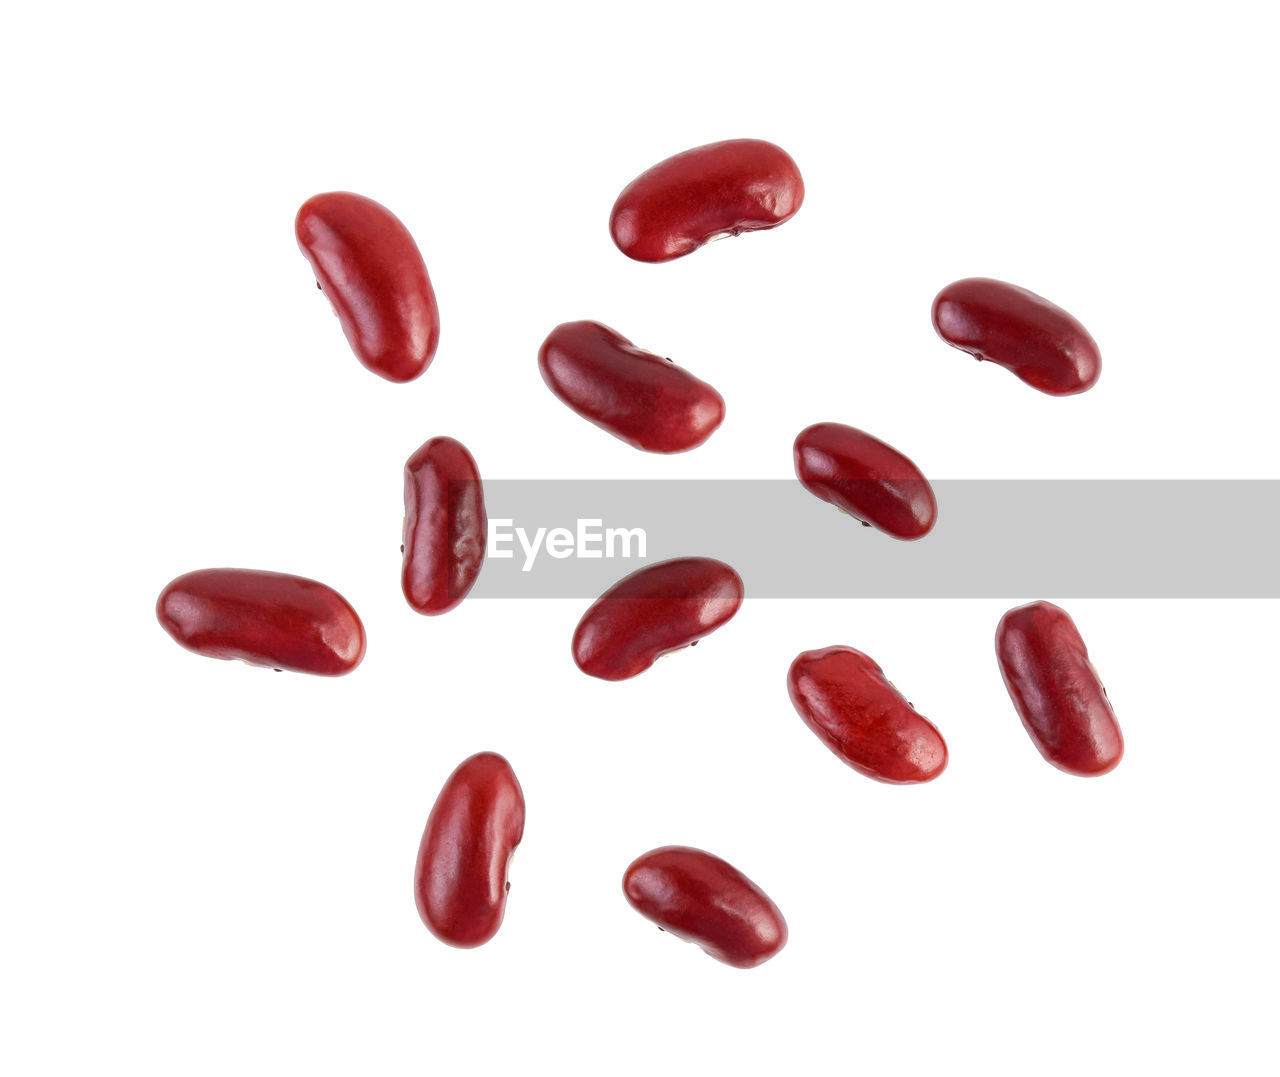 Close-up of kidney beans over white background